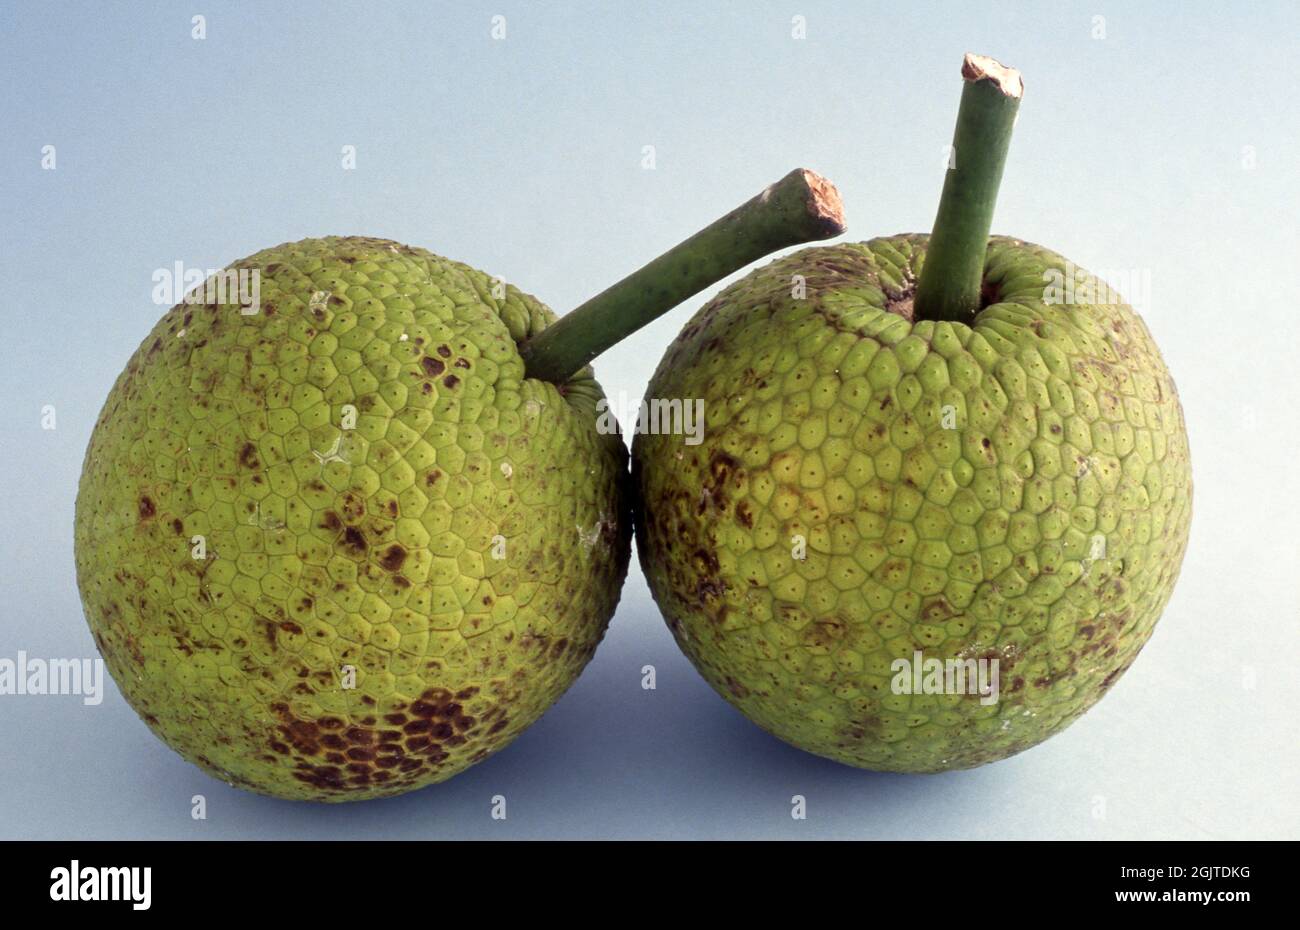 Studio image of breadfruit. Breadfruit is a species of flowering tree in the mulberry and jackfruit family (Moraceae). Stock Photo